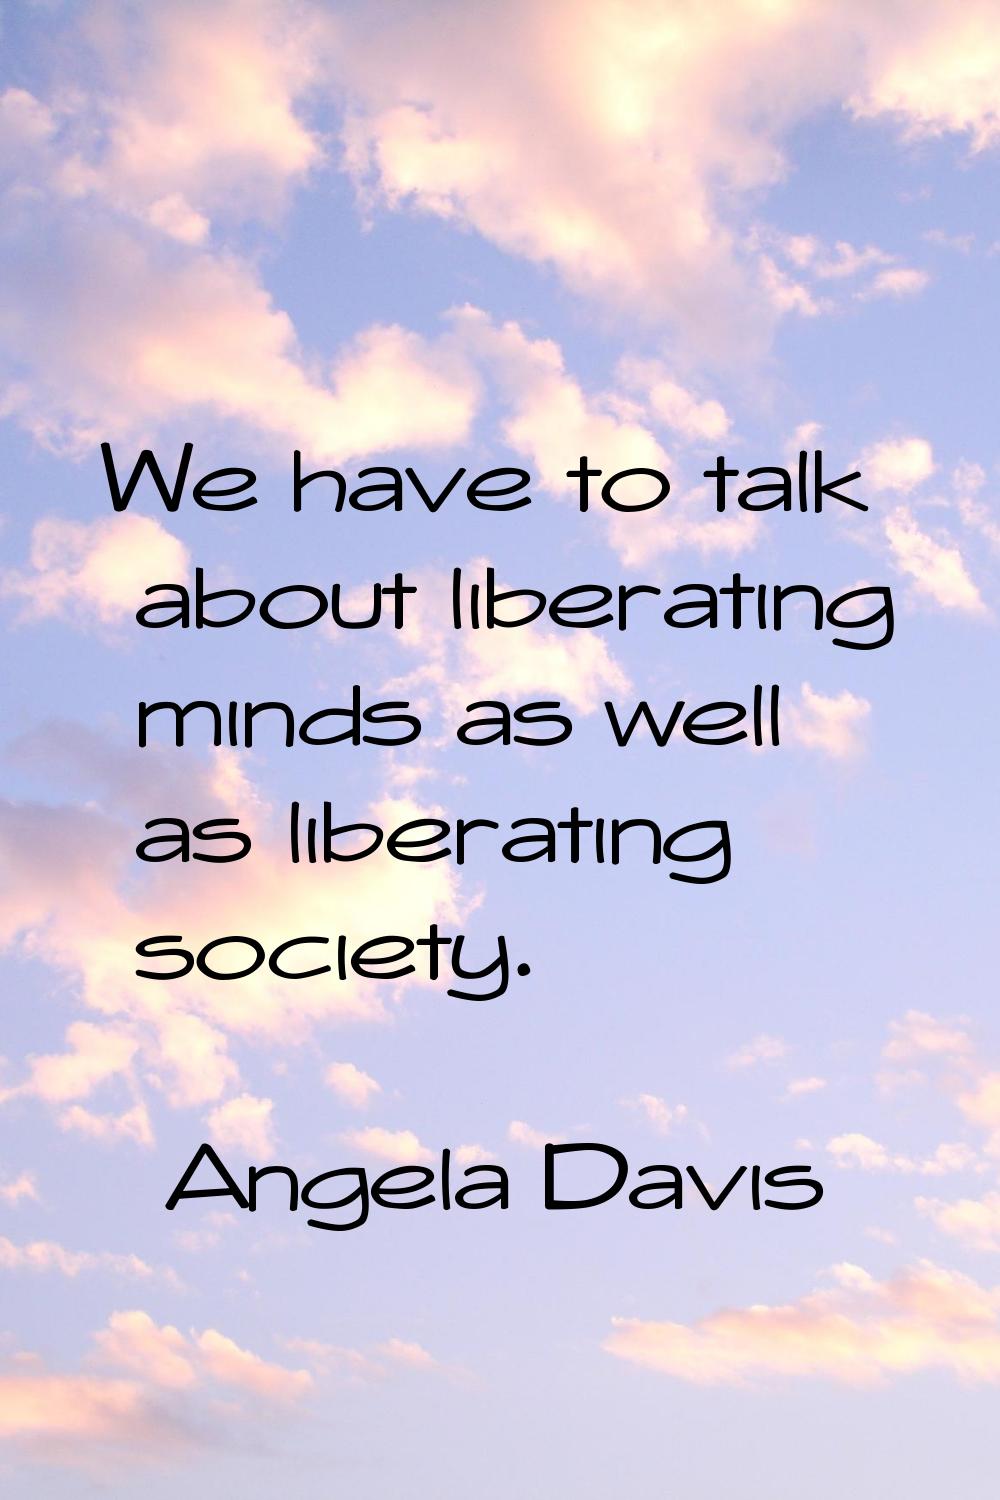 We have to talk about liberating minds as well as liberating society.